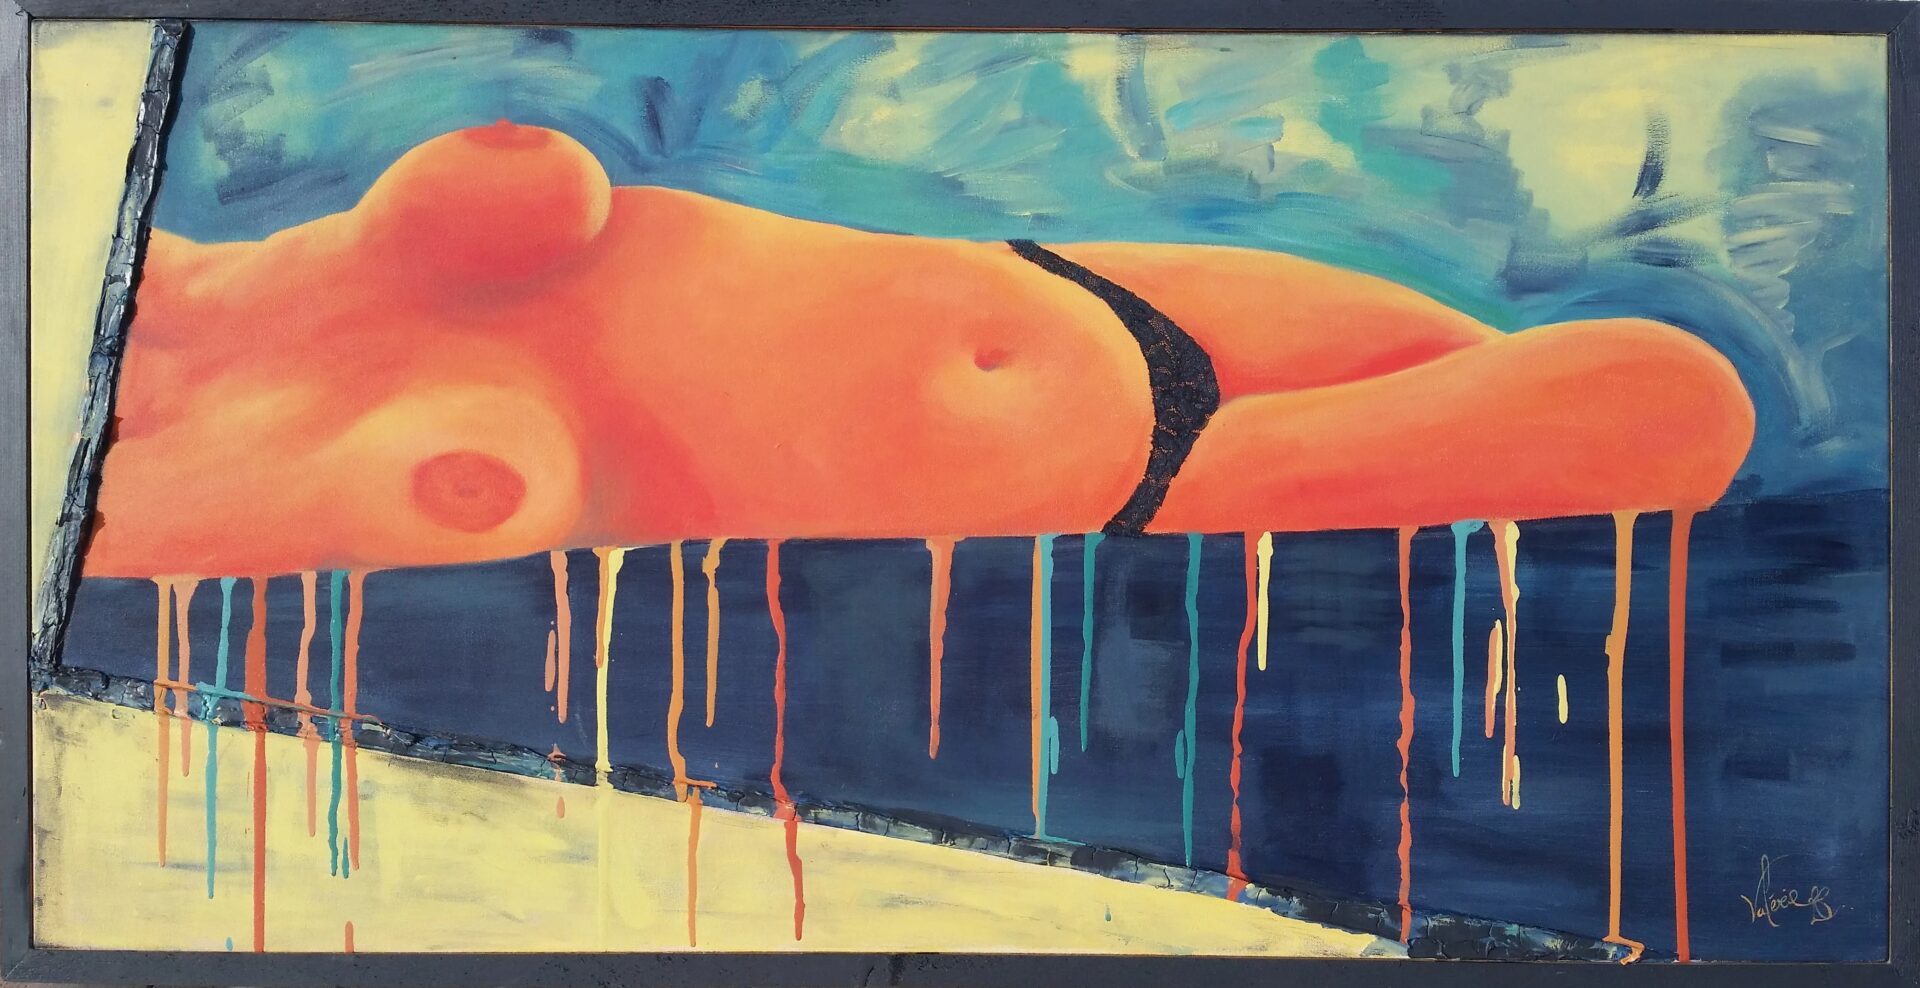 A painting of a naked woman with dripping paint.